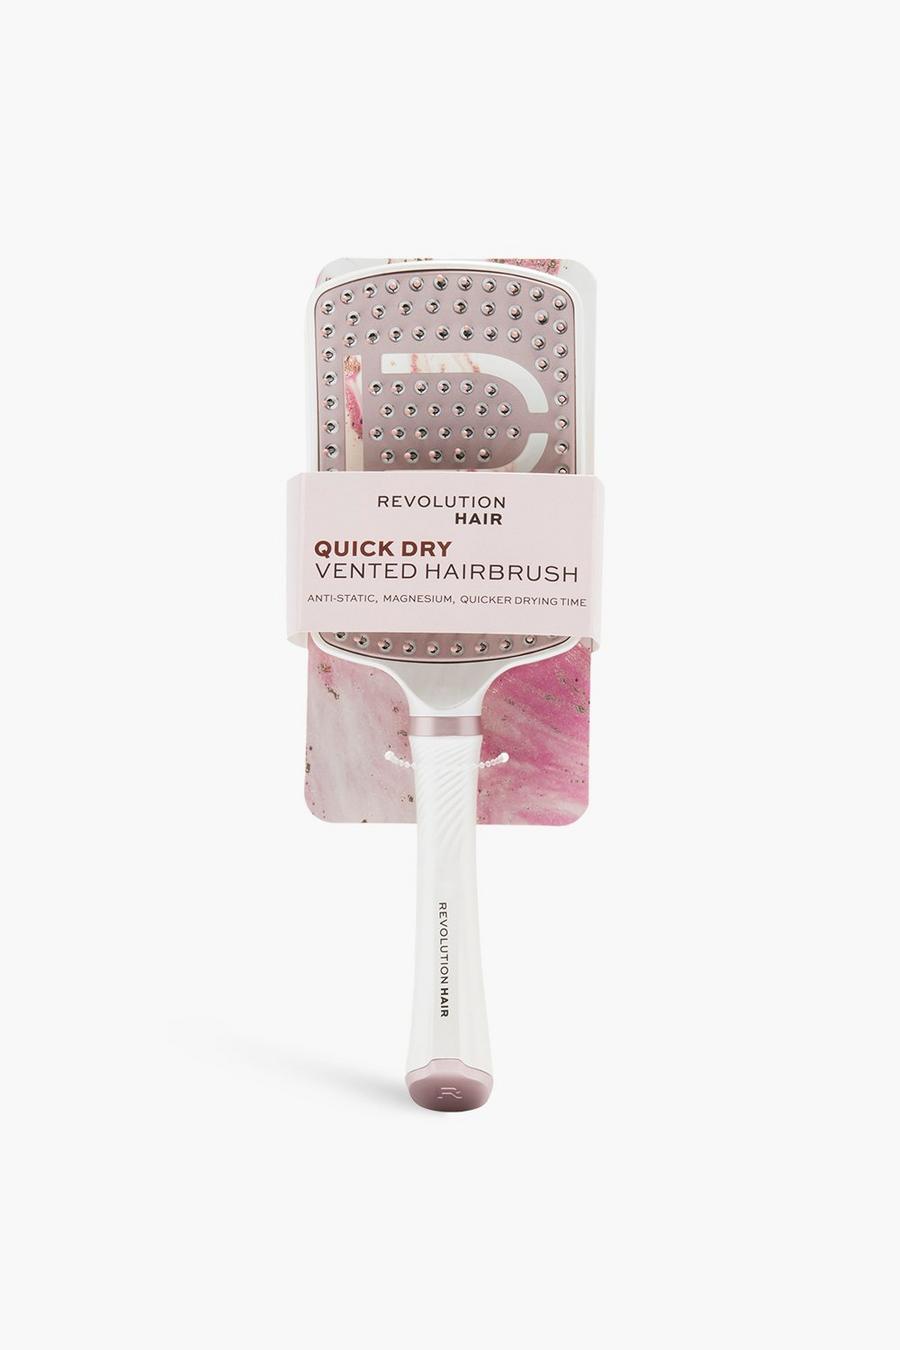 Revolution Quick Dry Vented Hairbrush, Pink